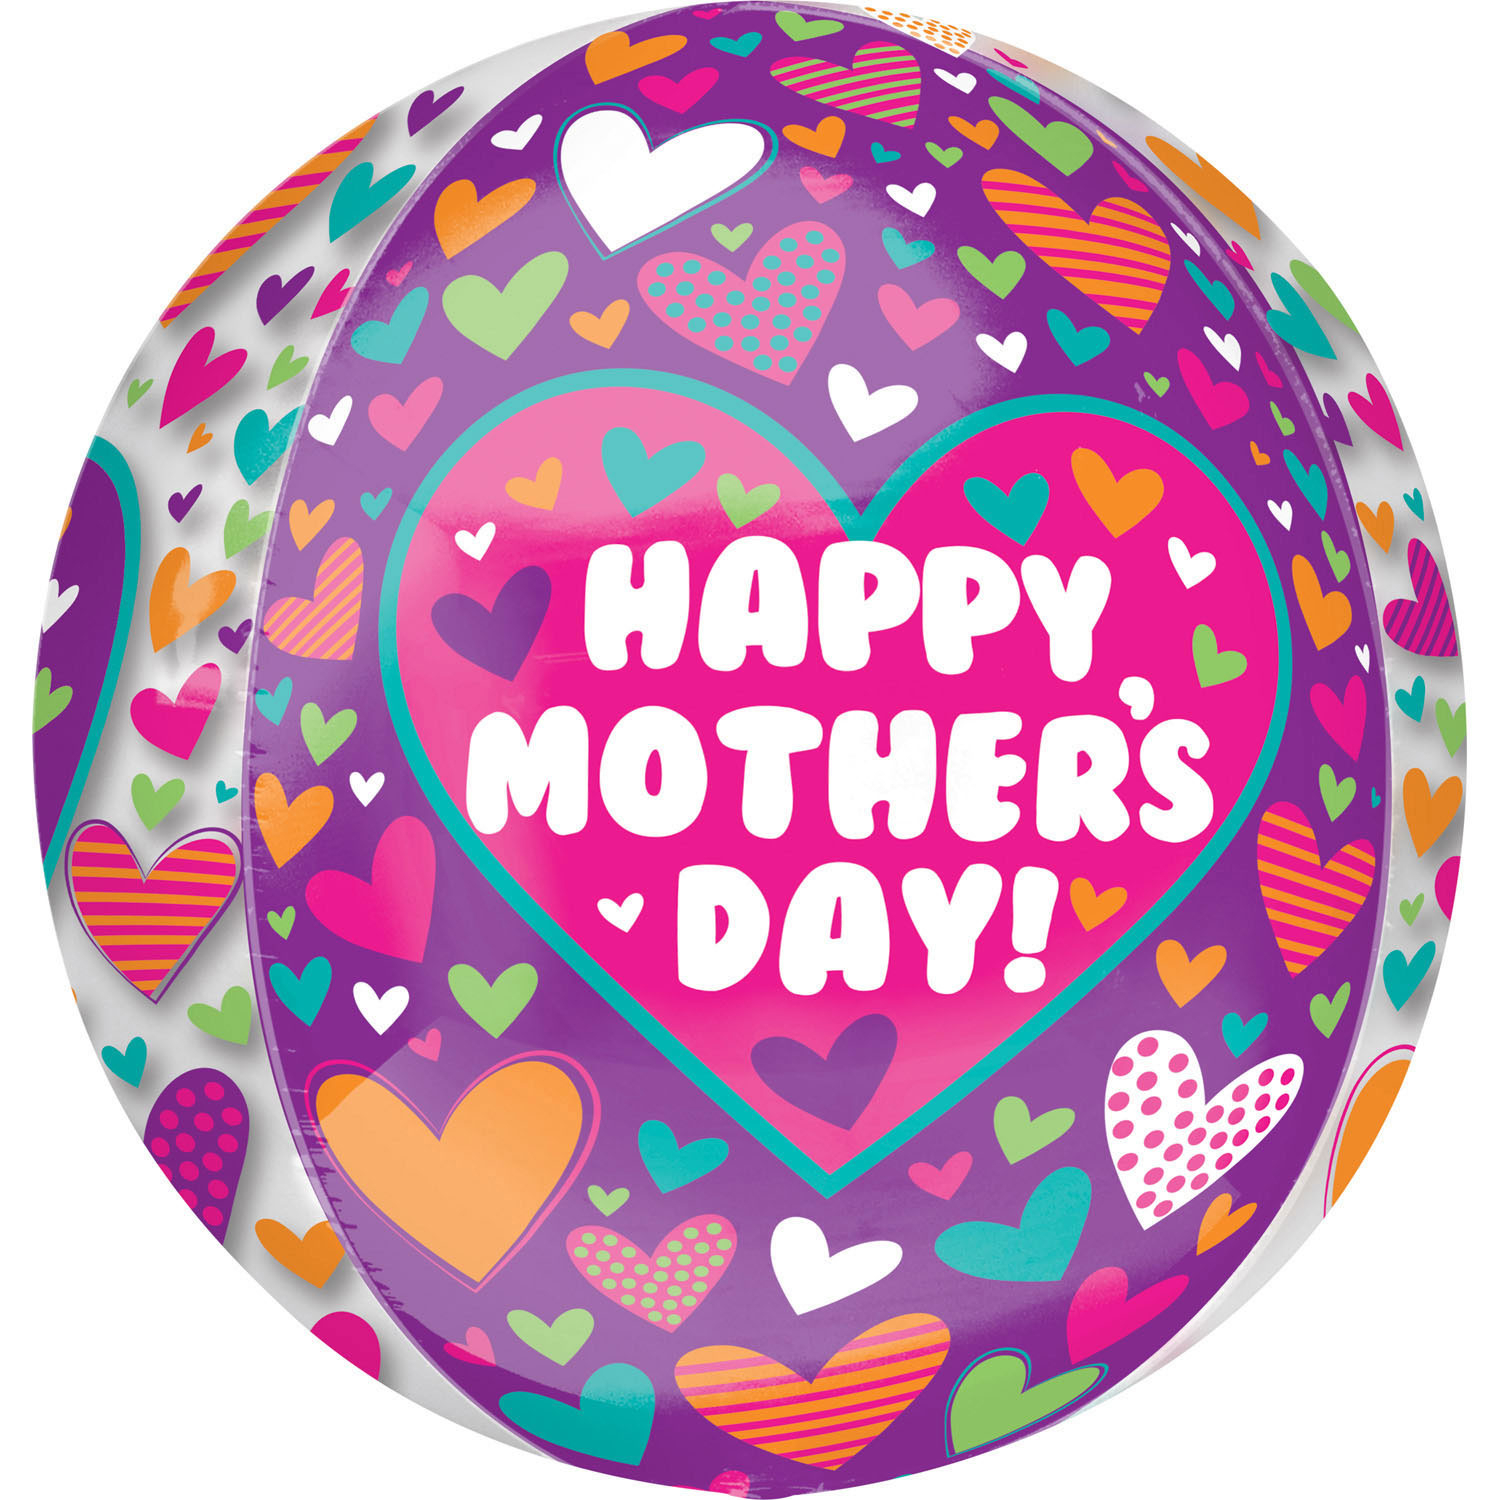 Foil balloon with hearts - Mother's Day